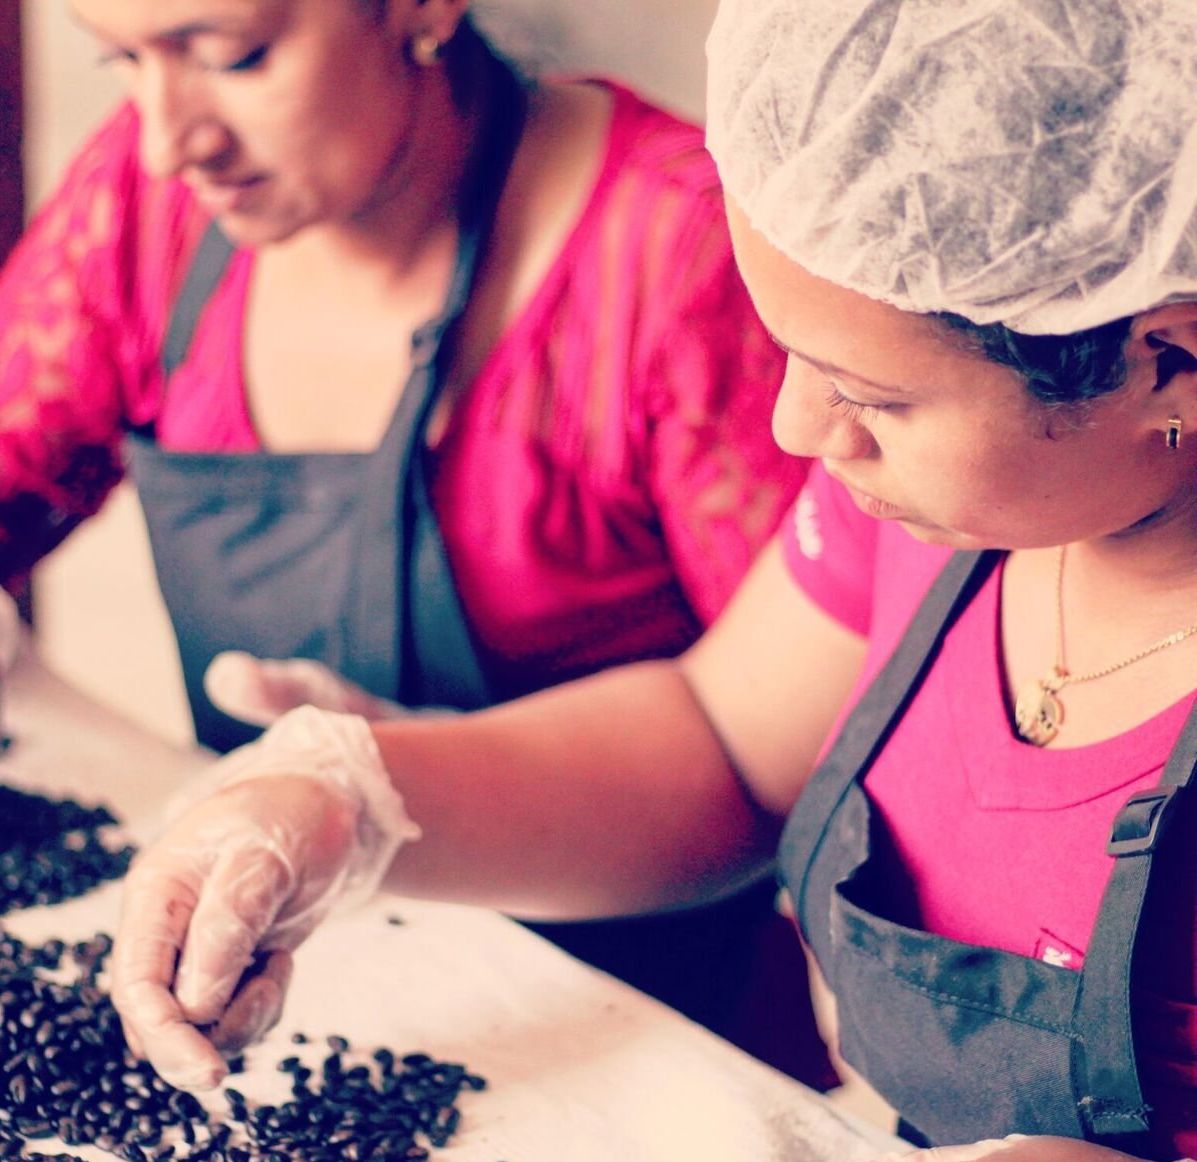 Vega mostly works with women-owned farms that grow their beans organically and export less than 500 to 1,000 pounds a year.